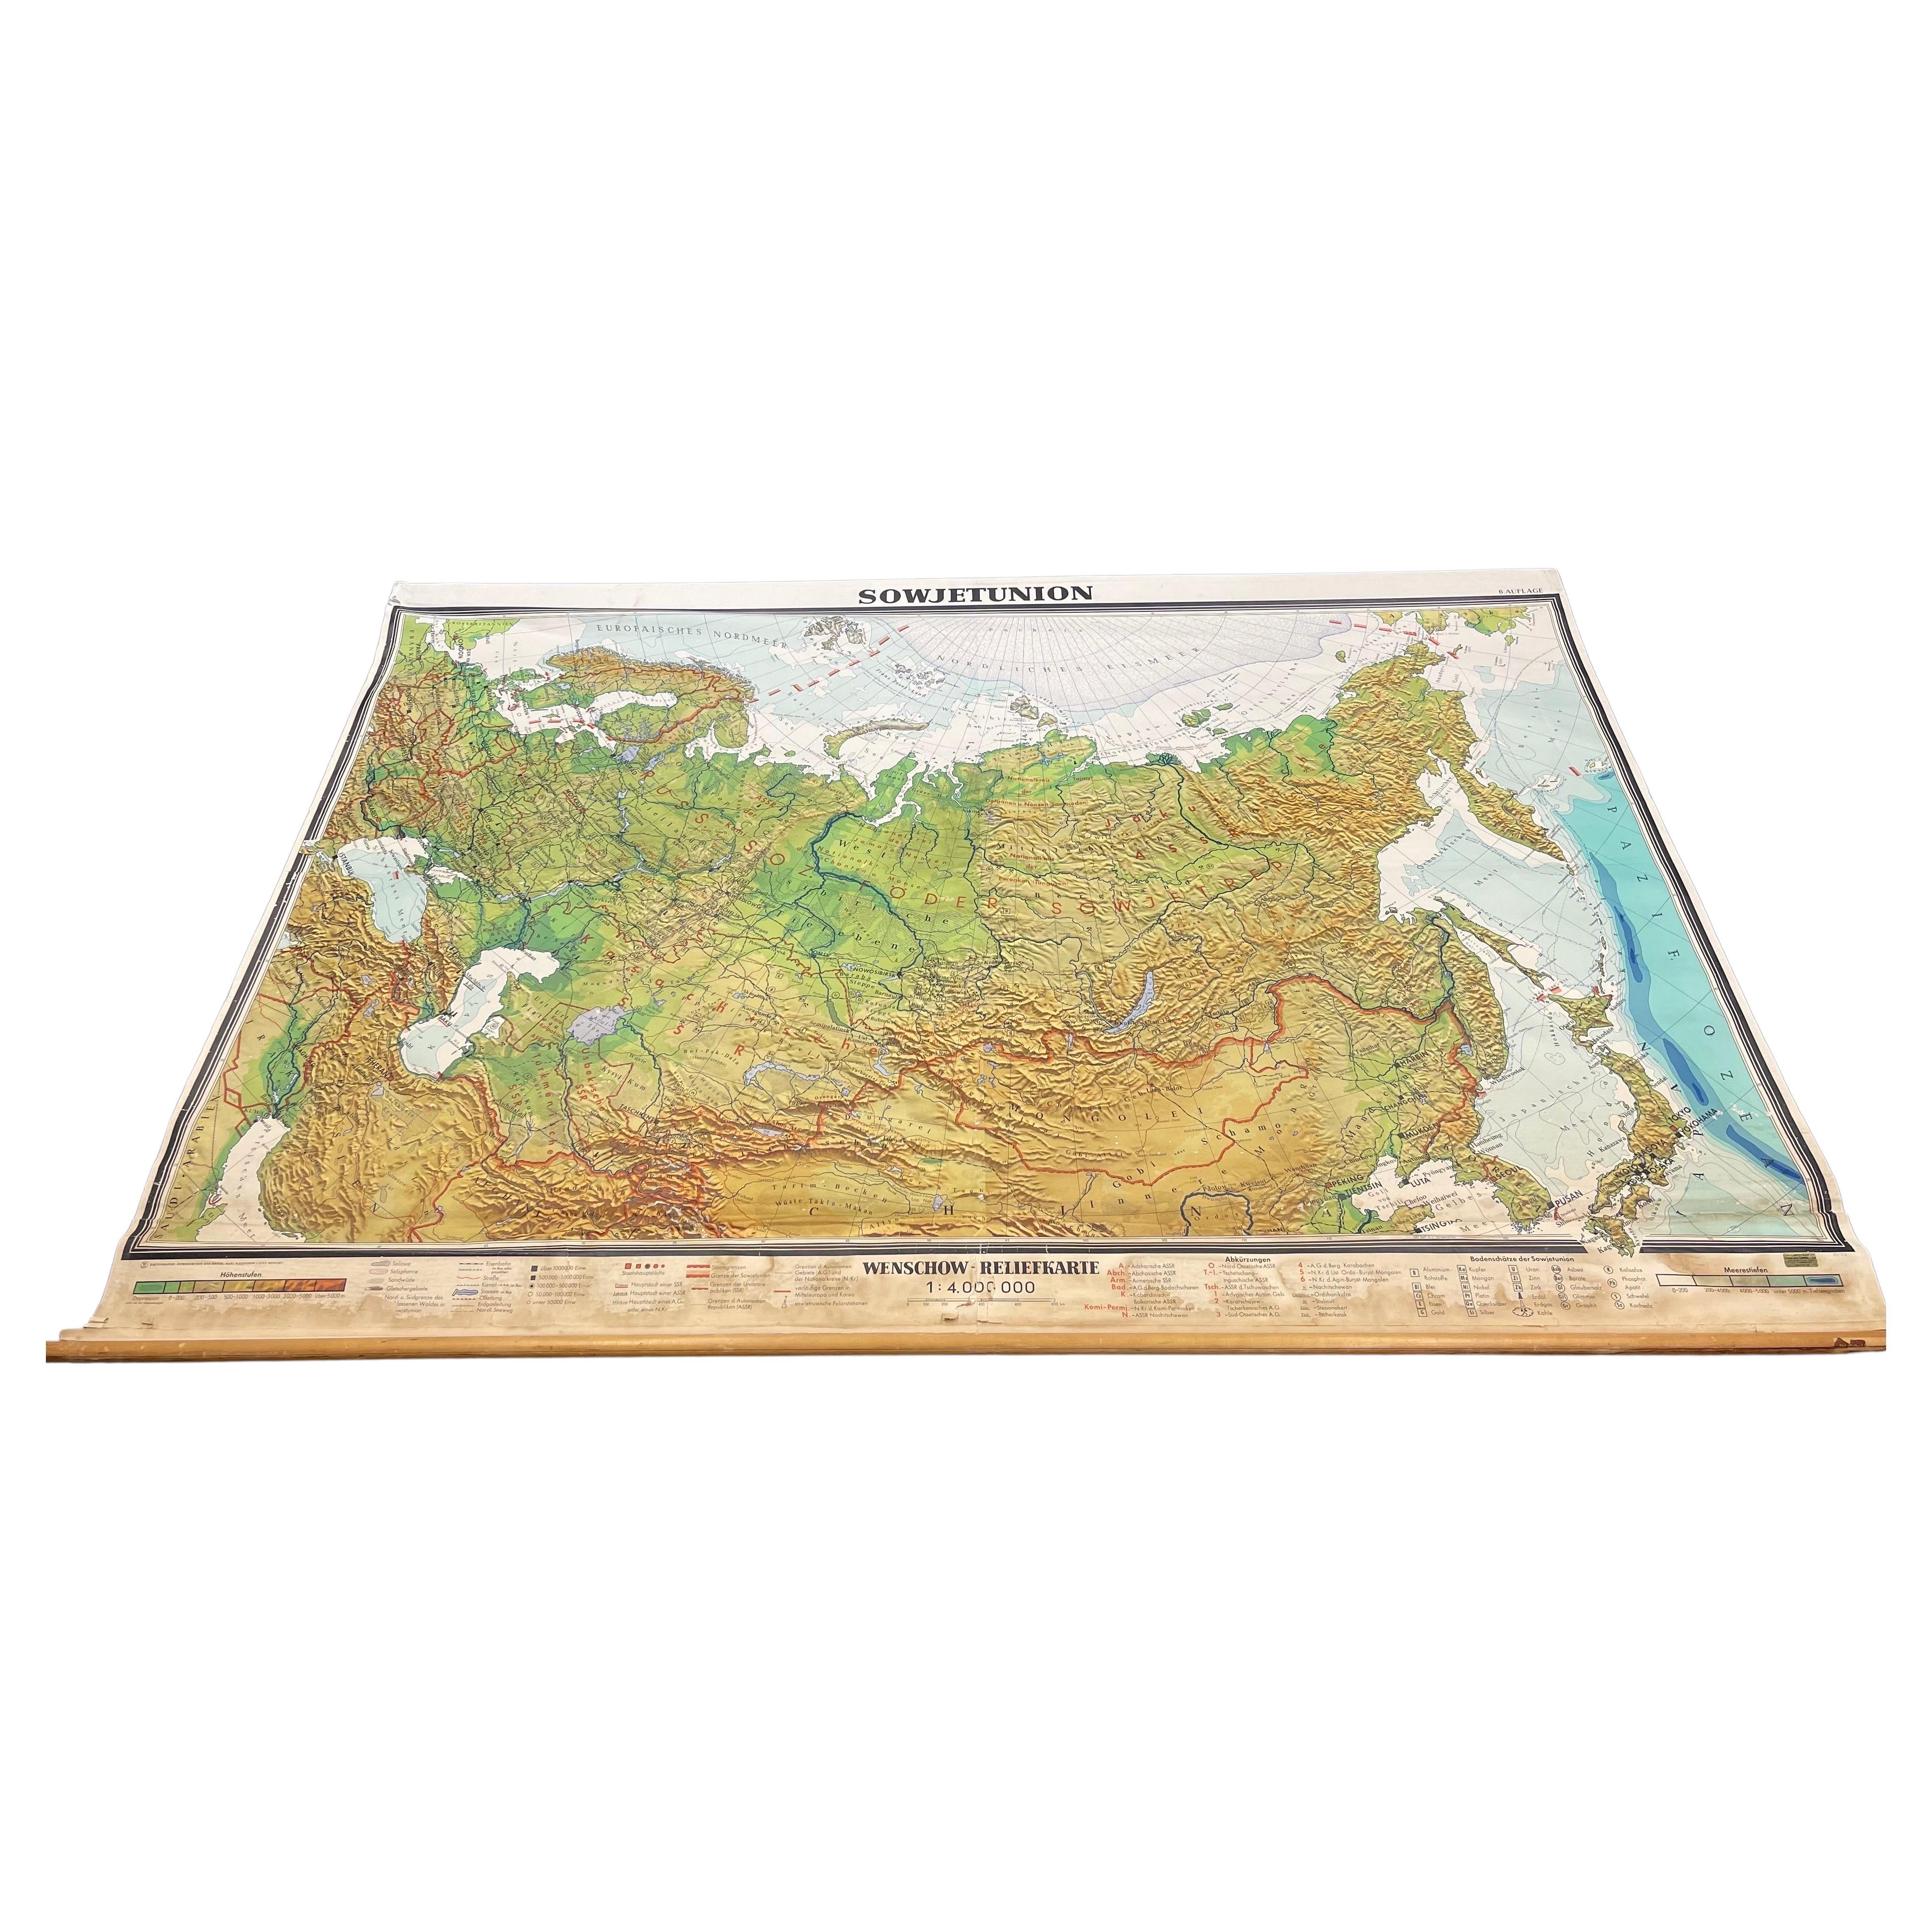 Massive Vintage Wall Map of the Soviet Union 'Sowjetunion' by Karl Wenschow For Sale 8